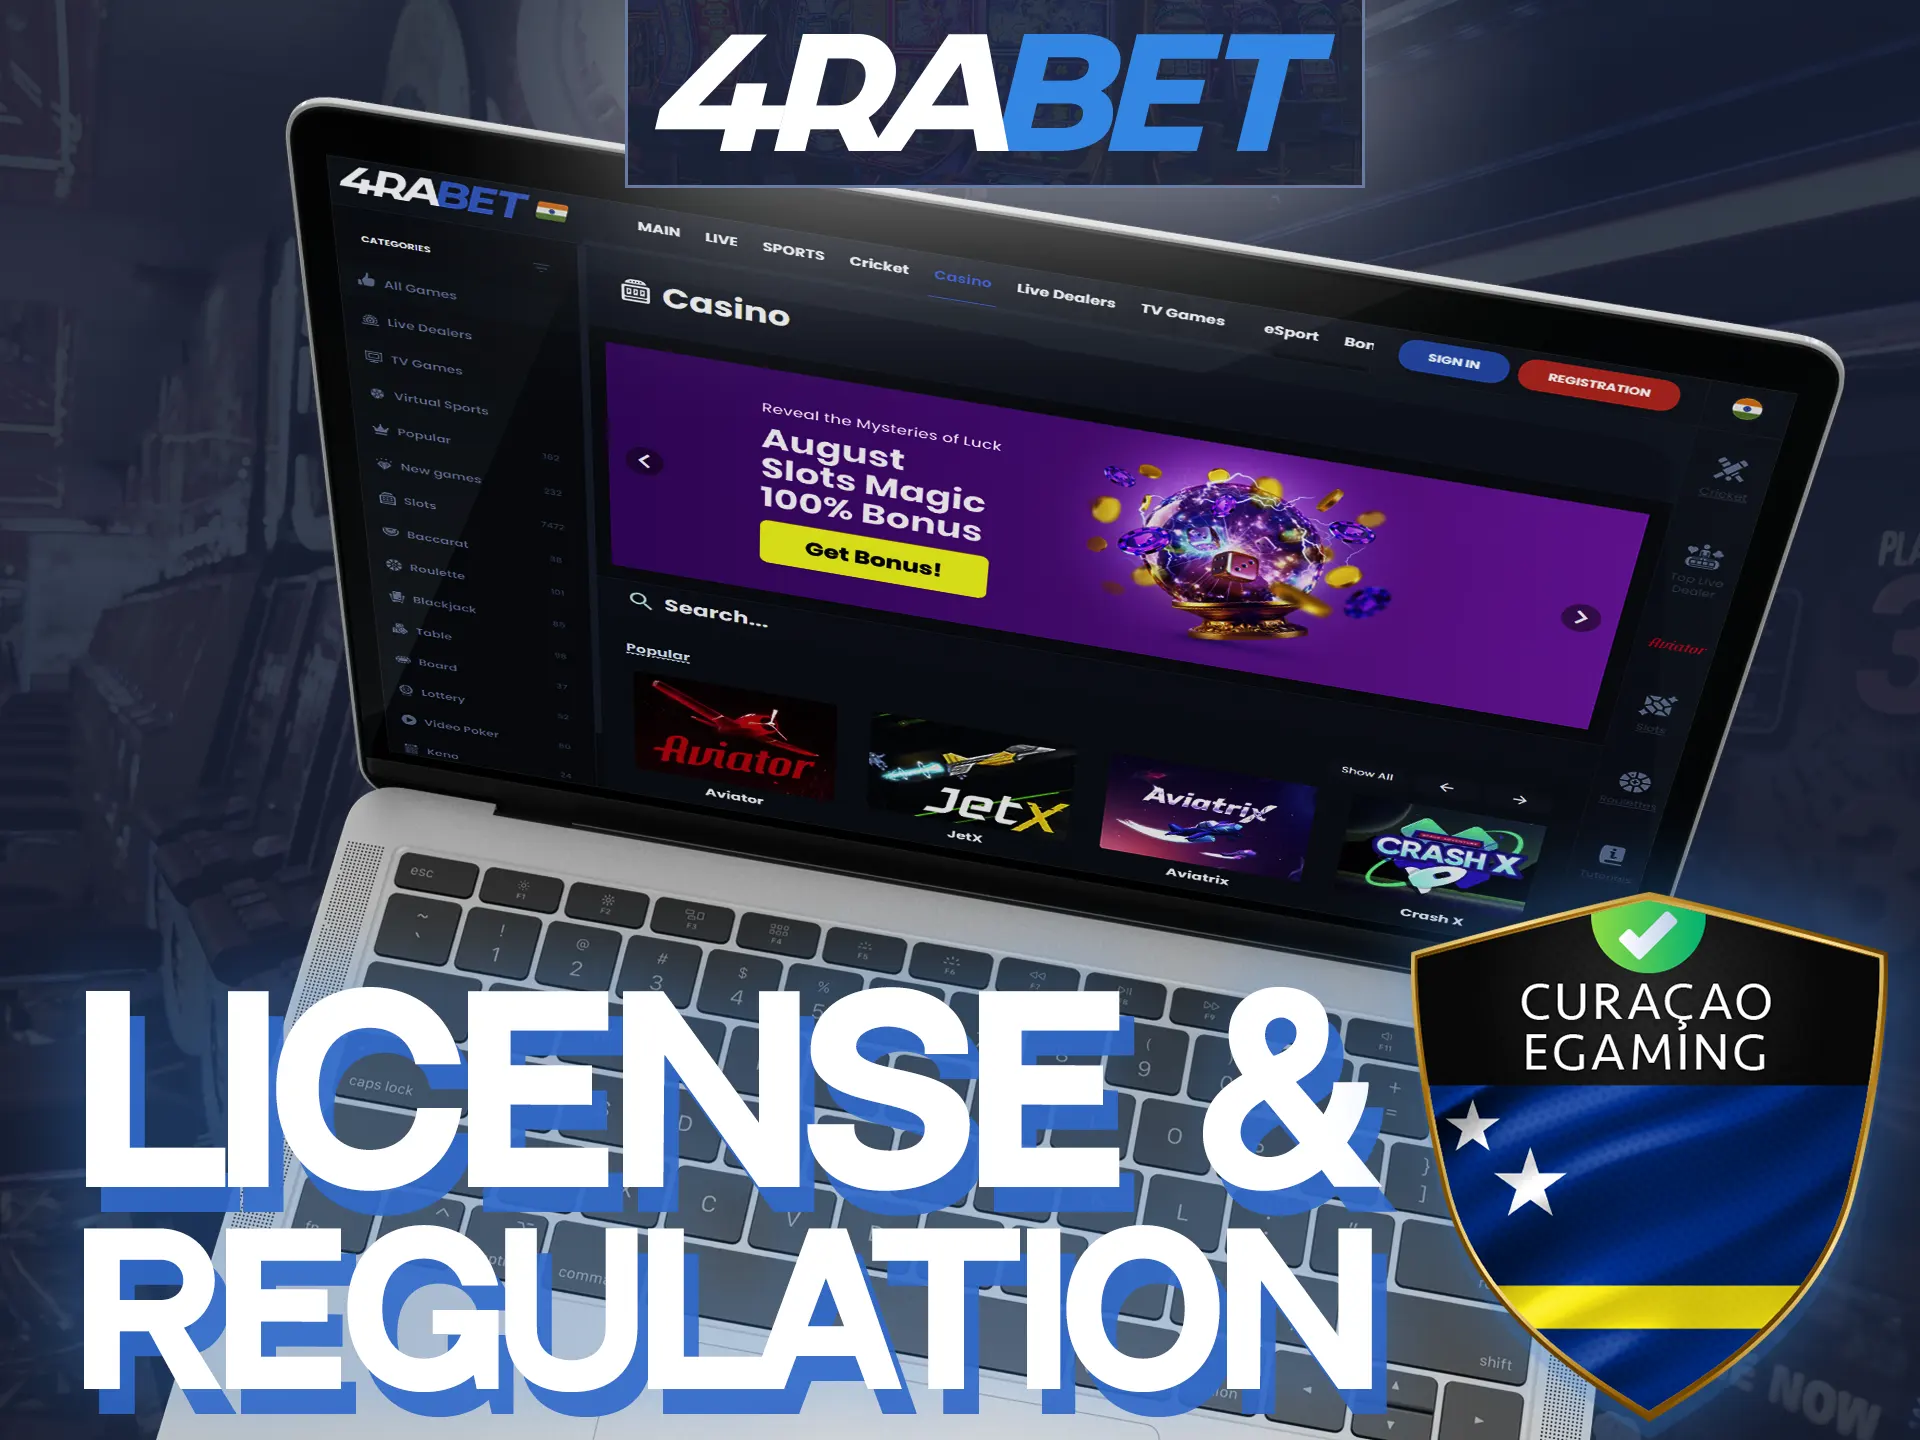 4Rabet online casino is licensed by Curaсao.